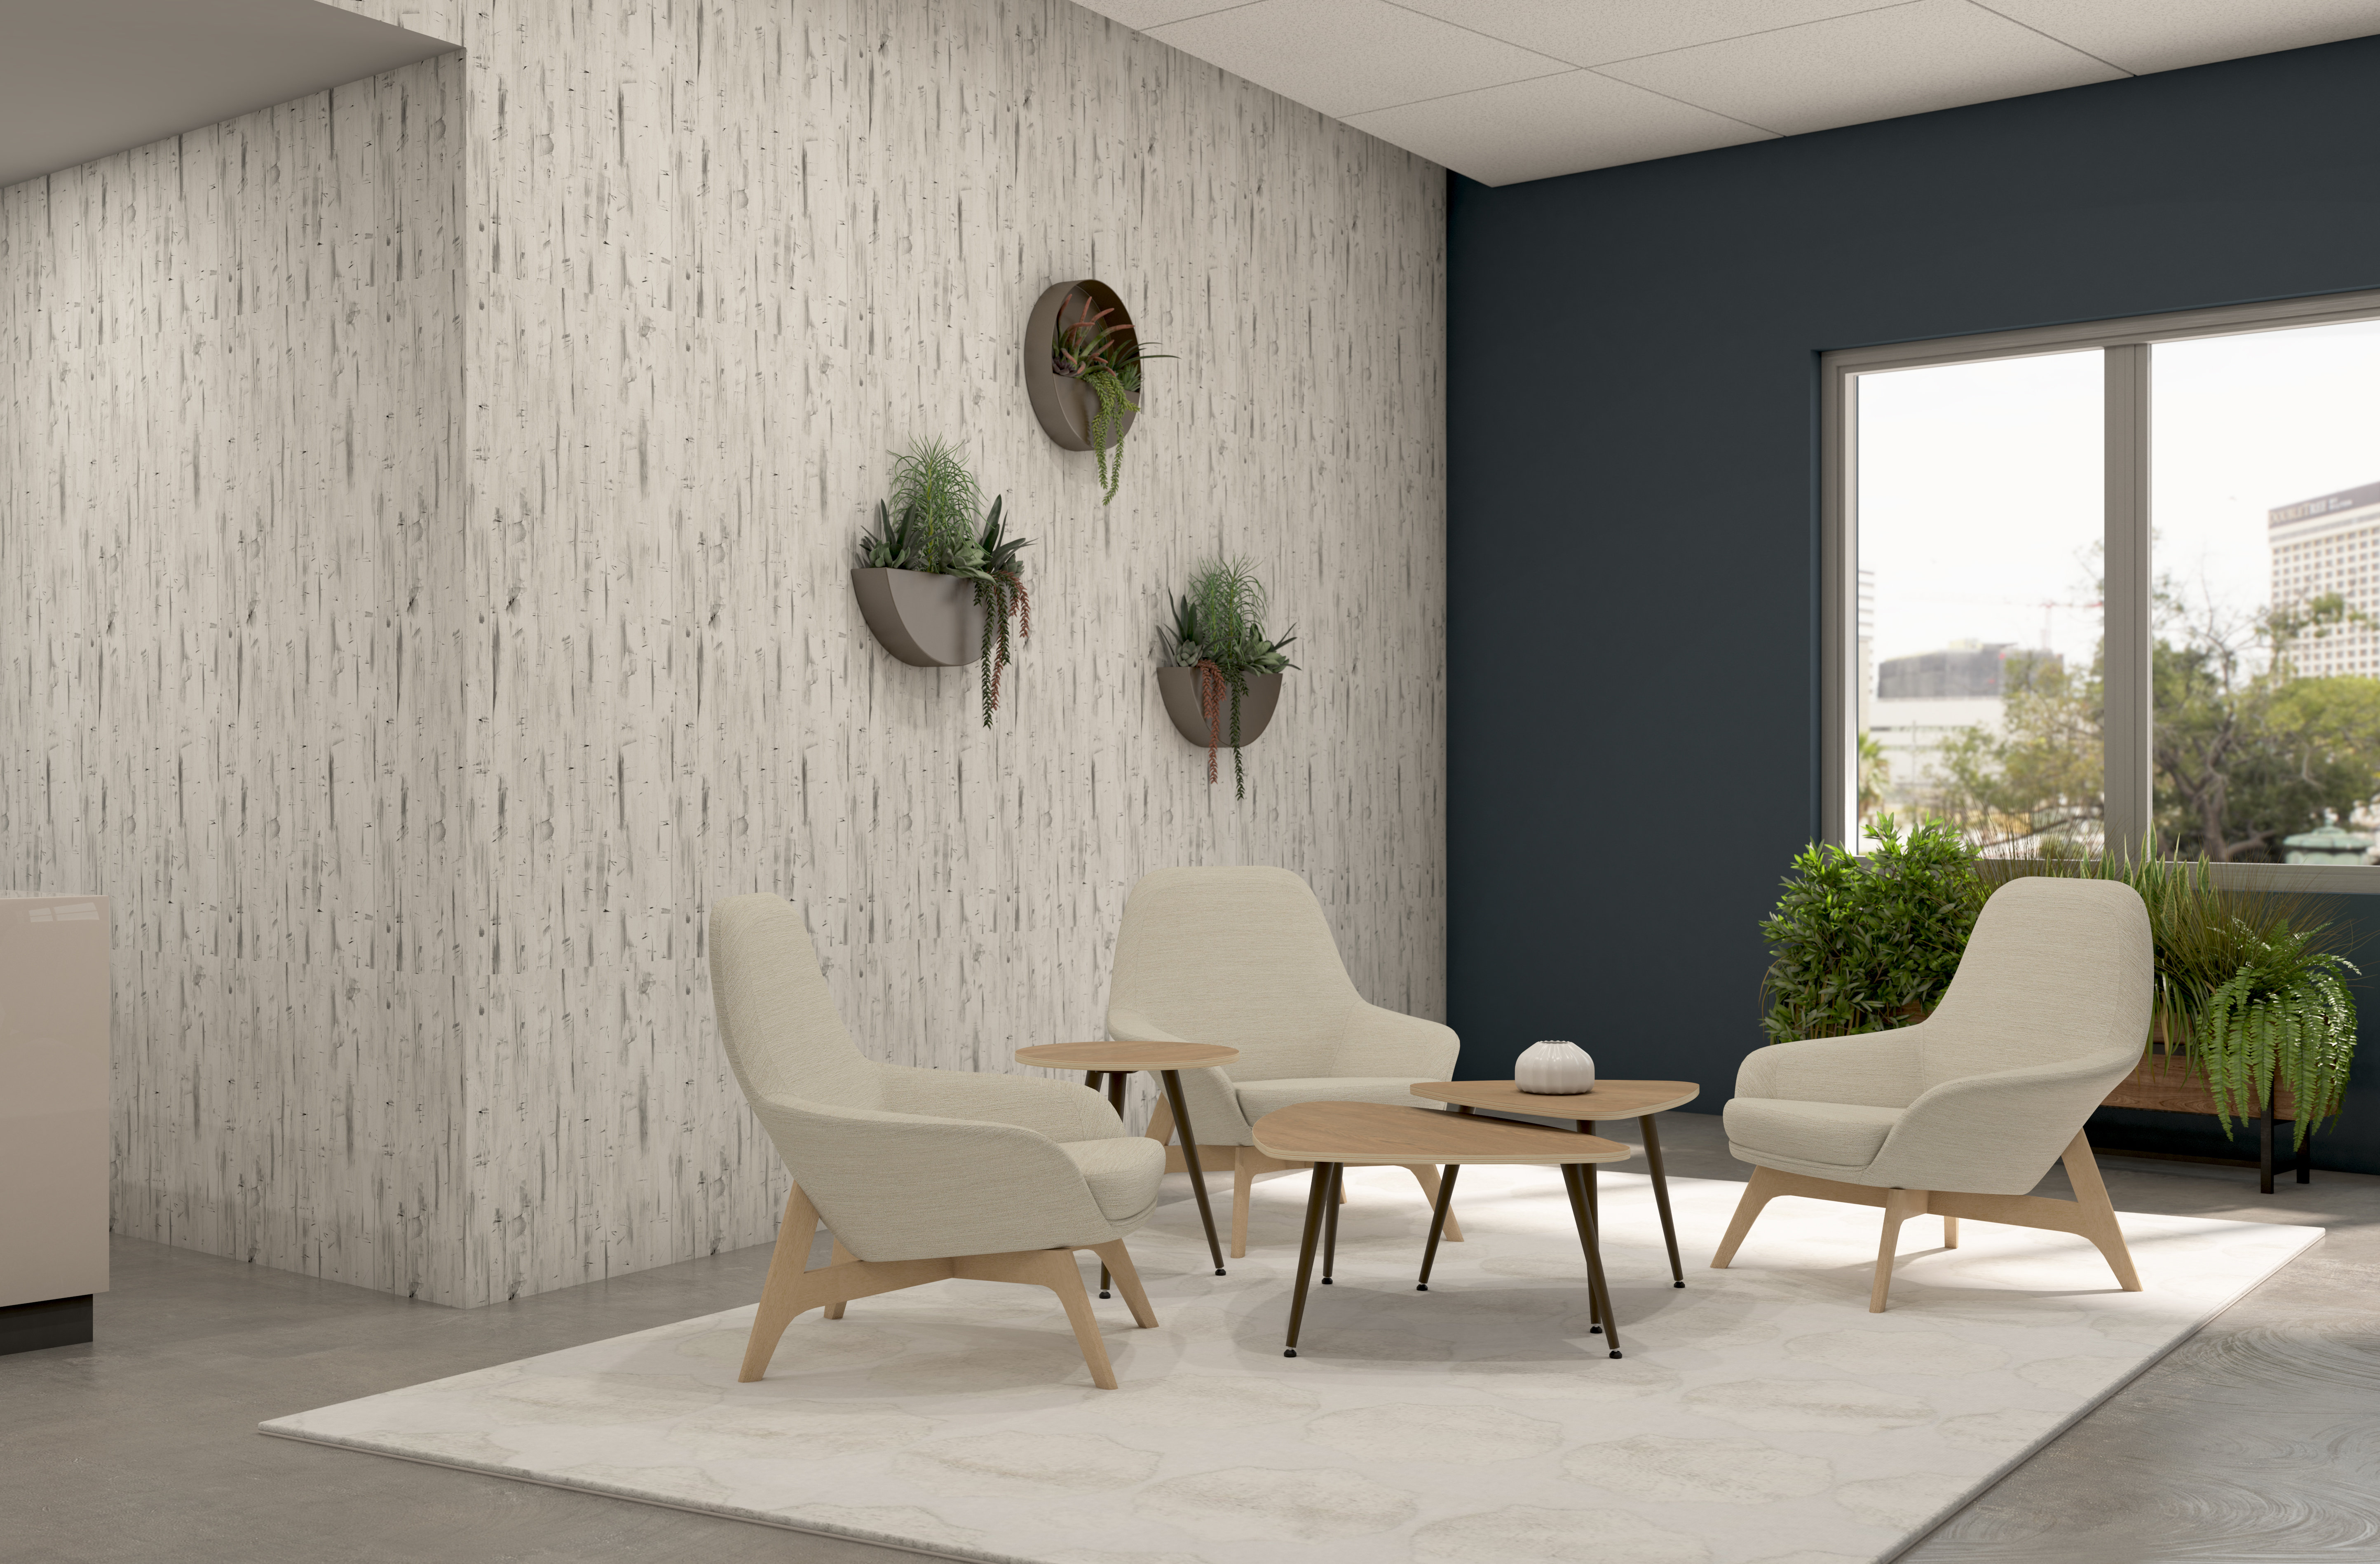 sound absorbing wallcovering with a birch tree pattern in a living room